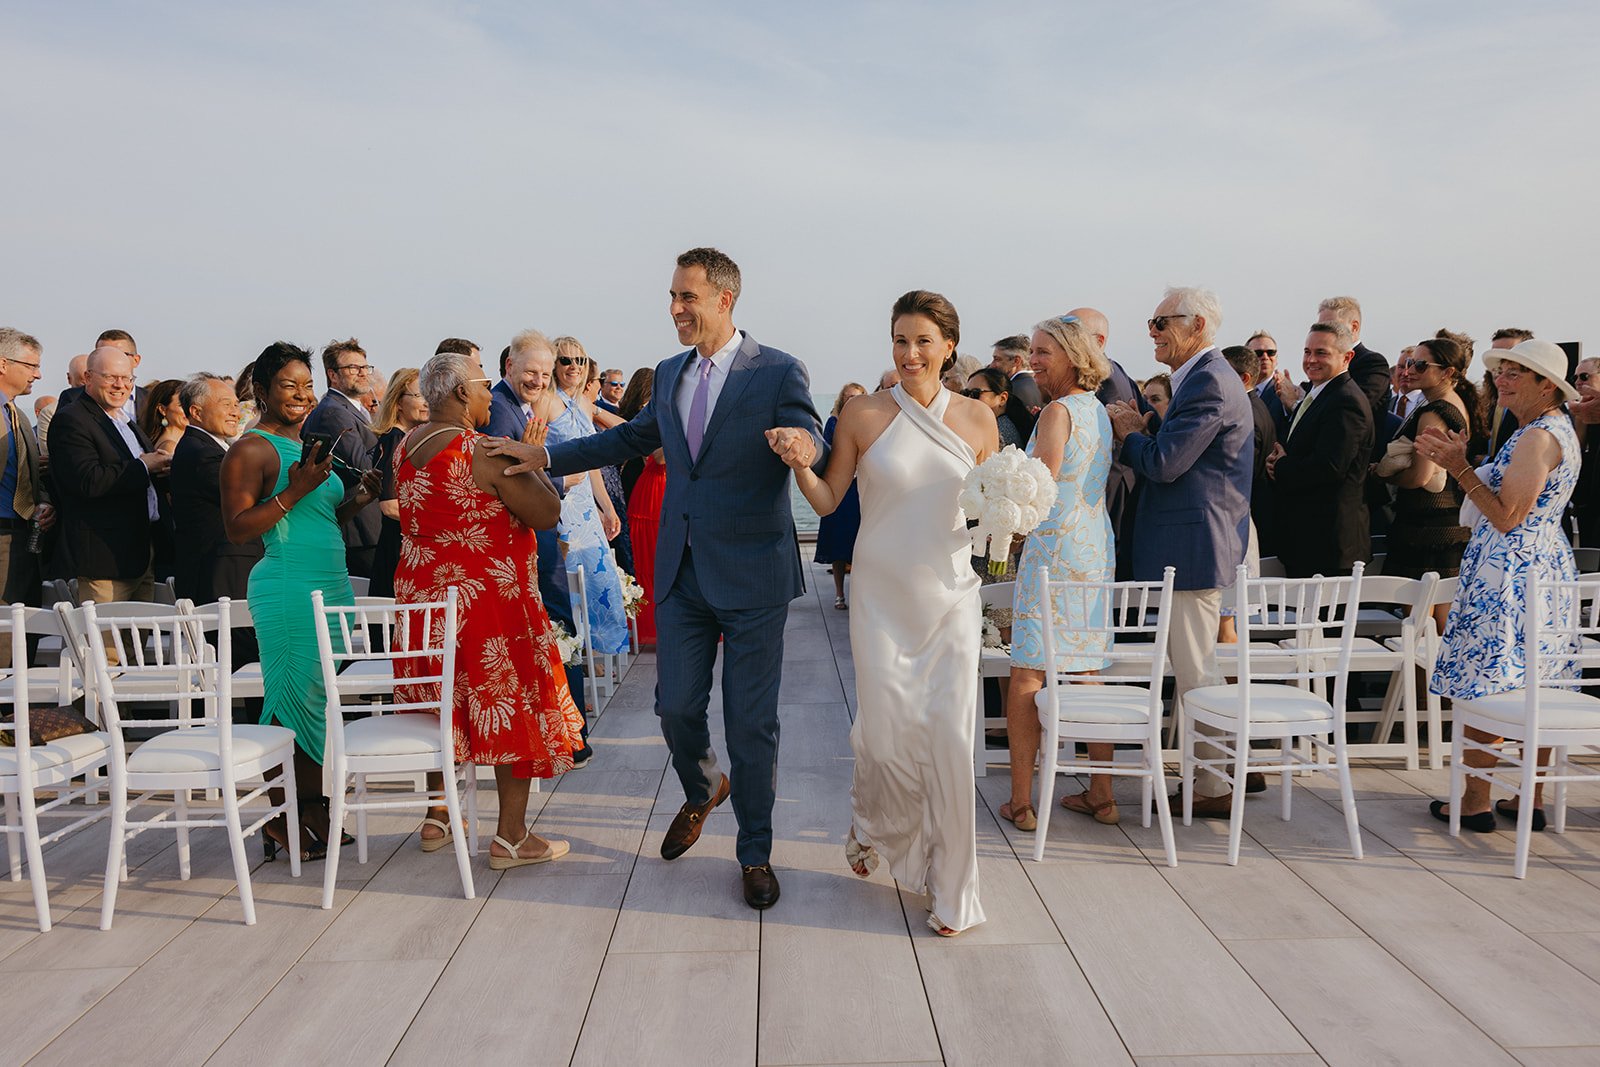 Summer Wedding at Wychmere on Cape Cod in New England